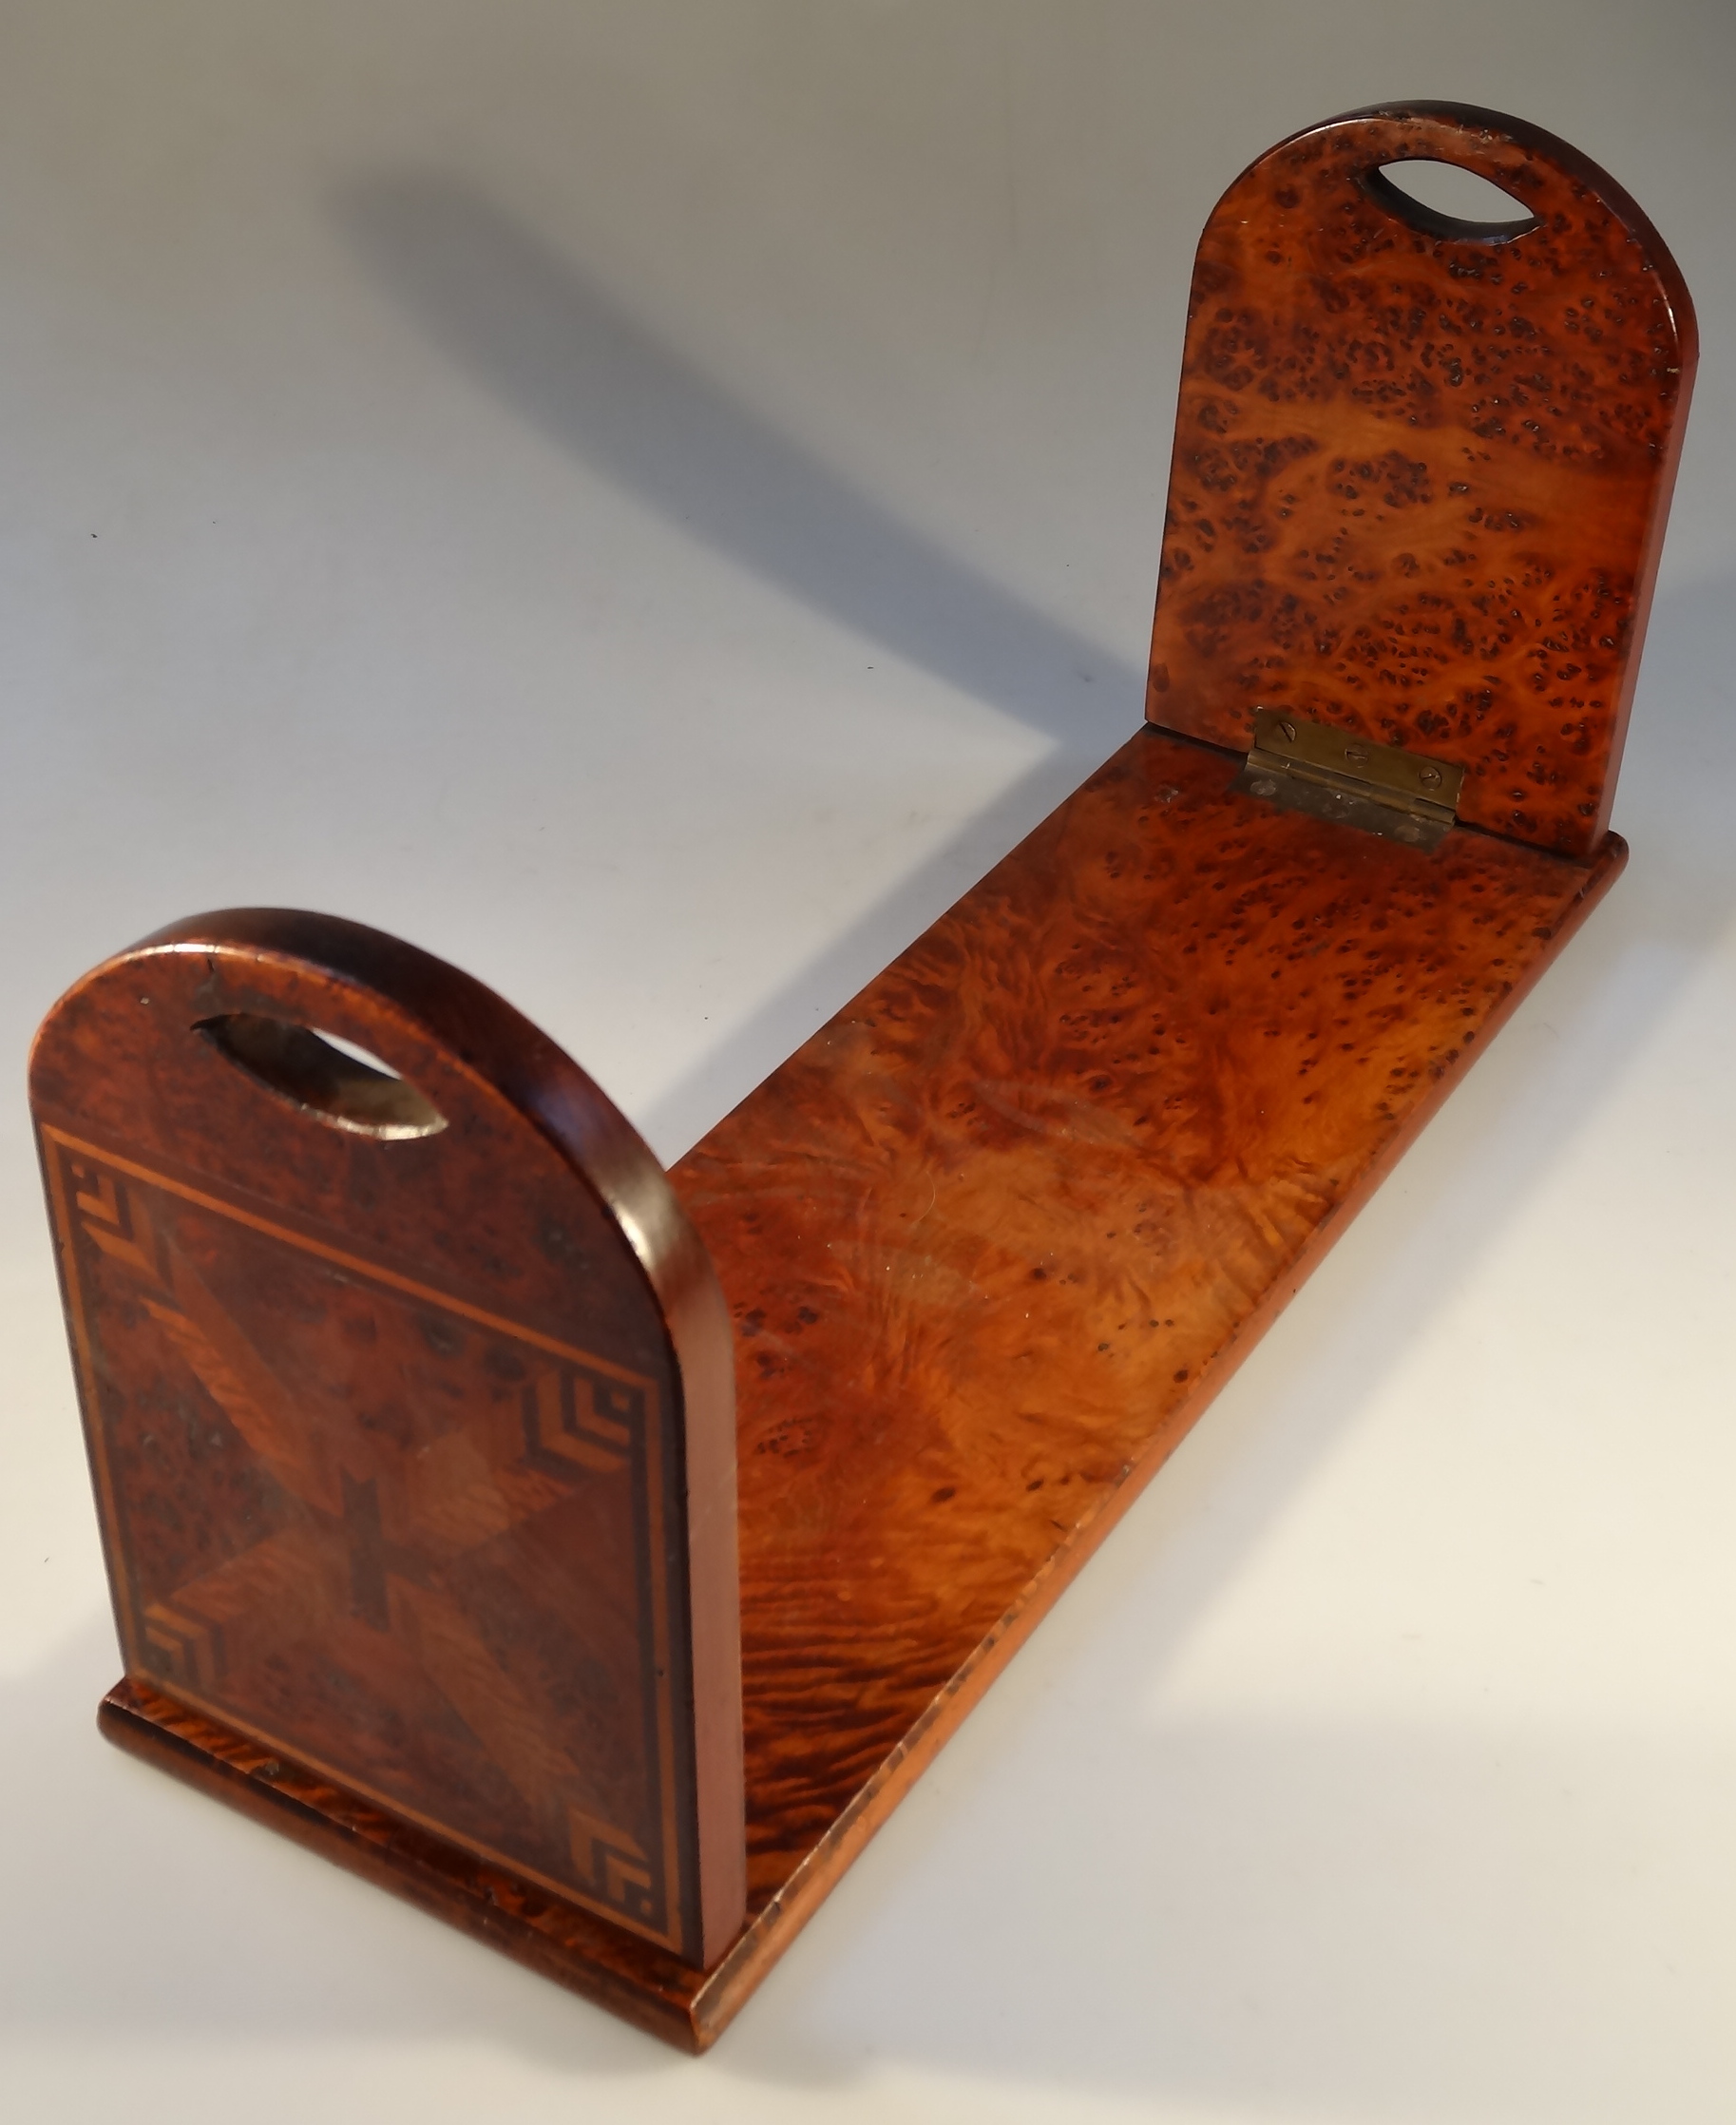 A late 19thC inlaid burr walnut book stand, the rounded end supports with parquetry panel and